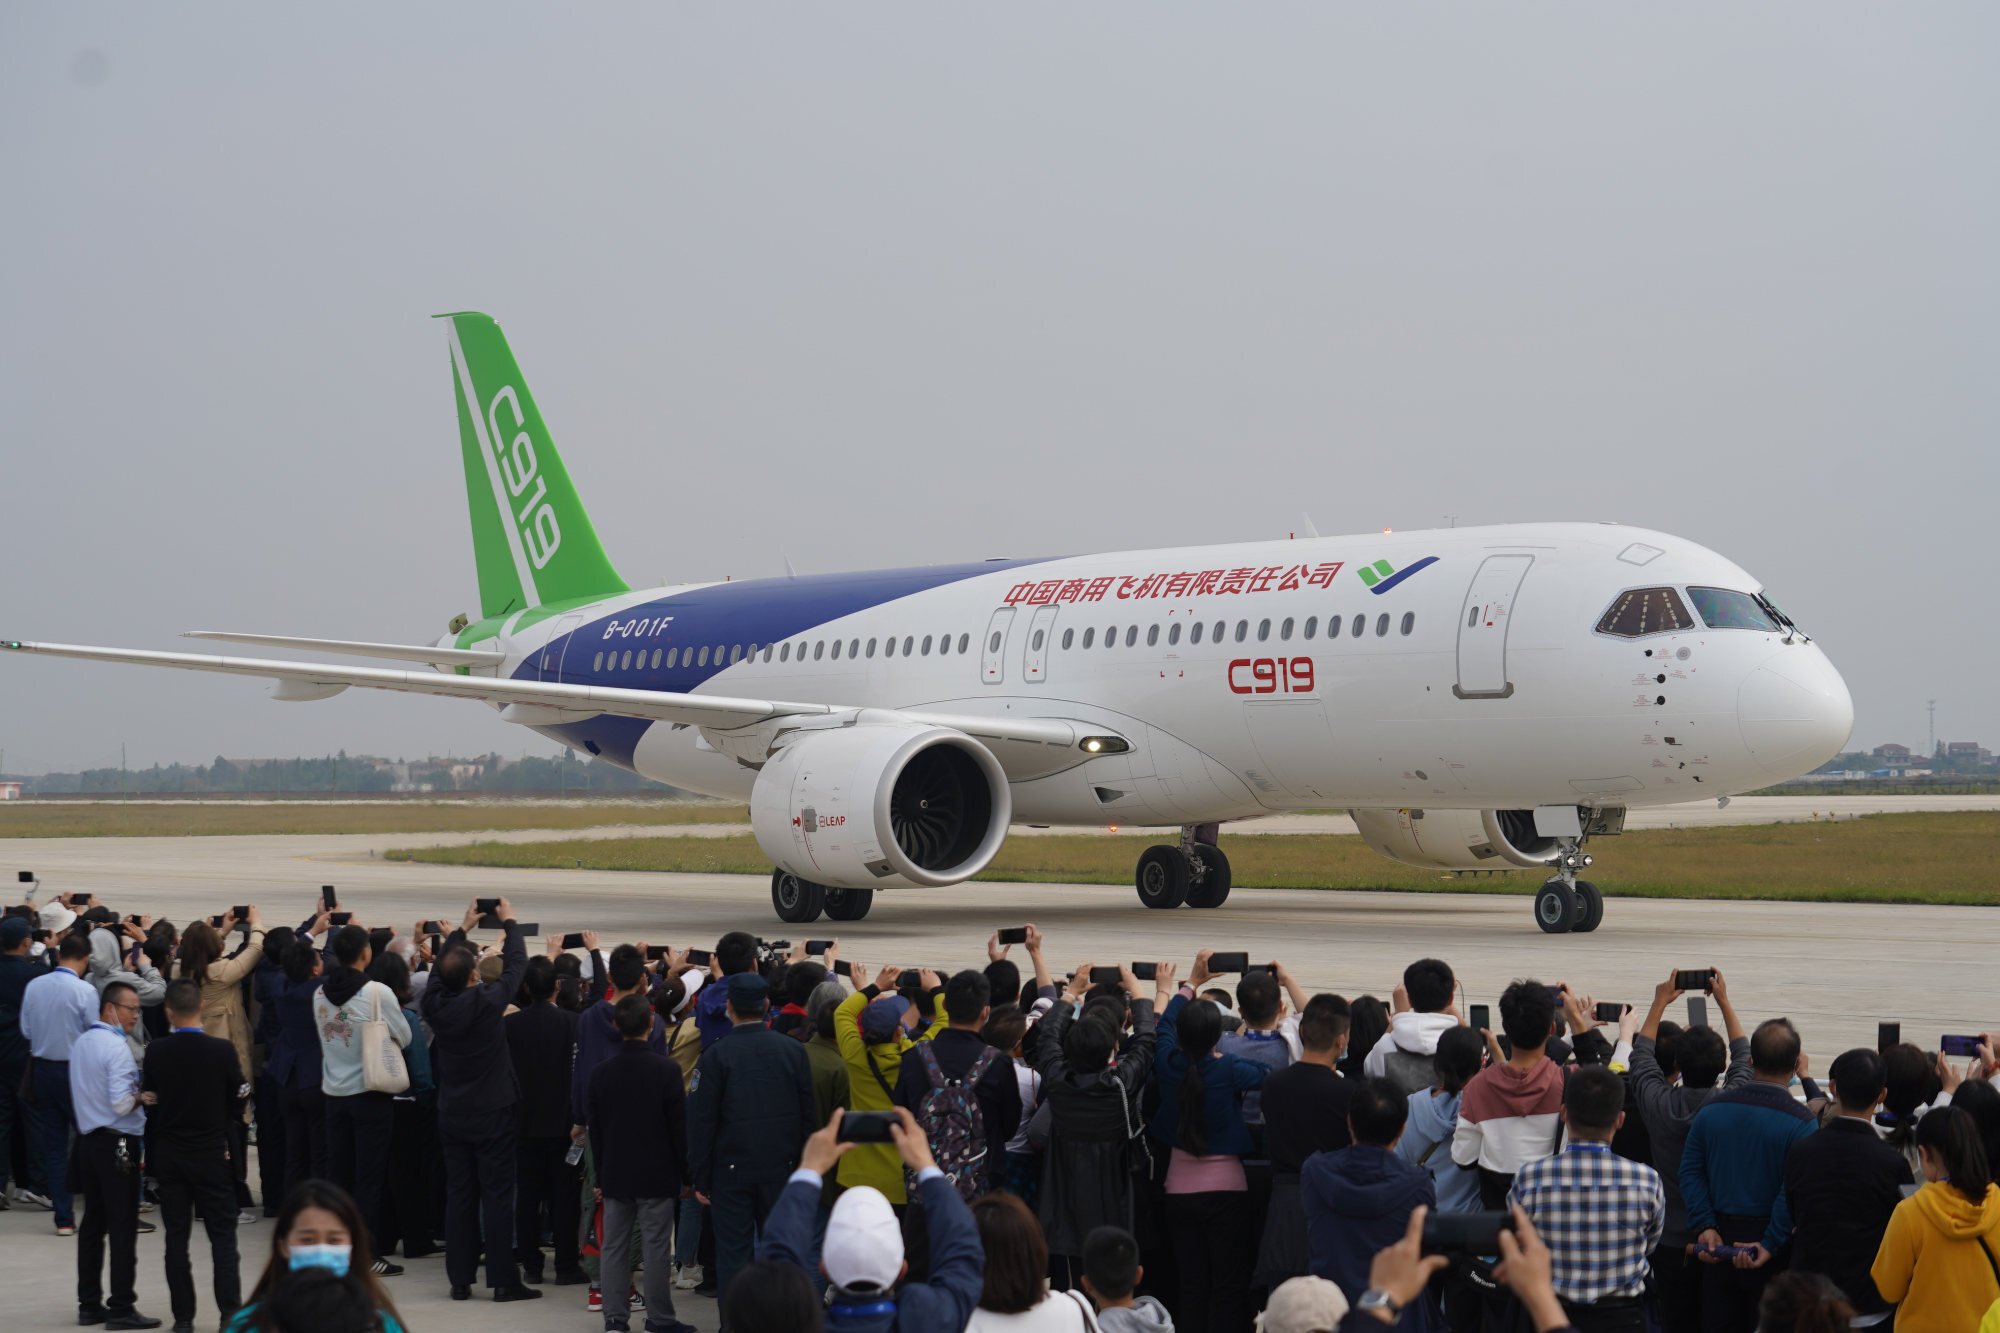 A C919 jet taxis on the runway during the 2020 Nanchang Flight Convention on October 31, 2020. Photo: Xinhua